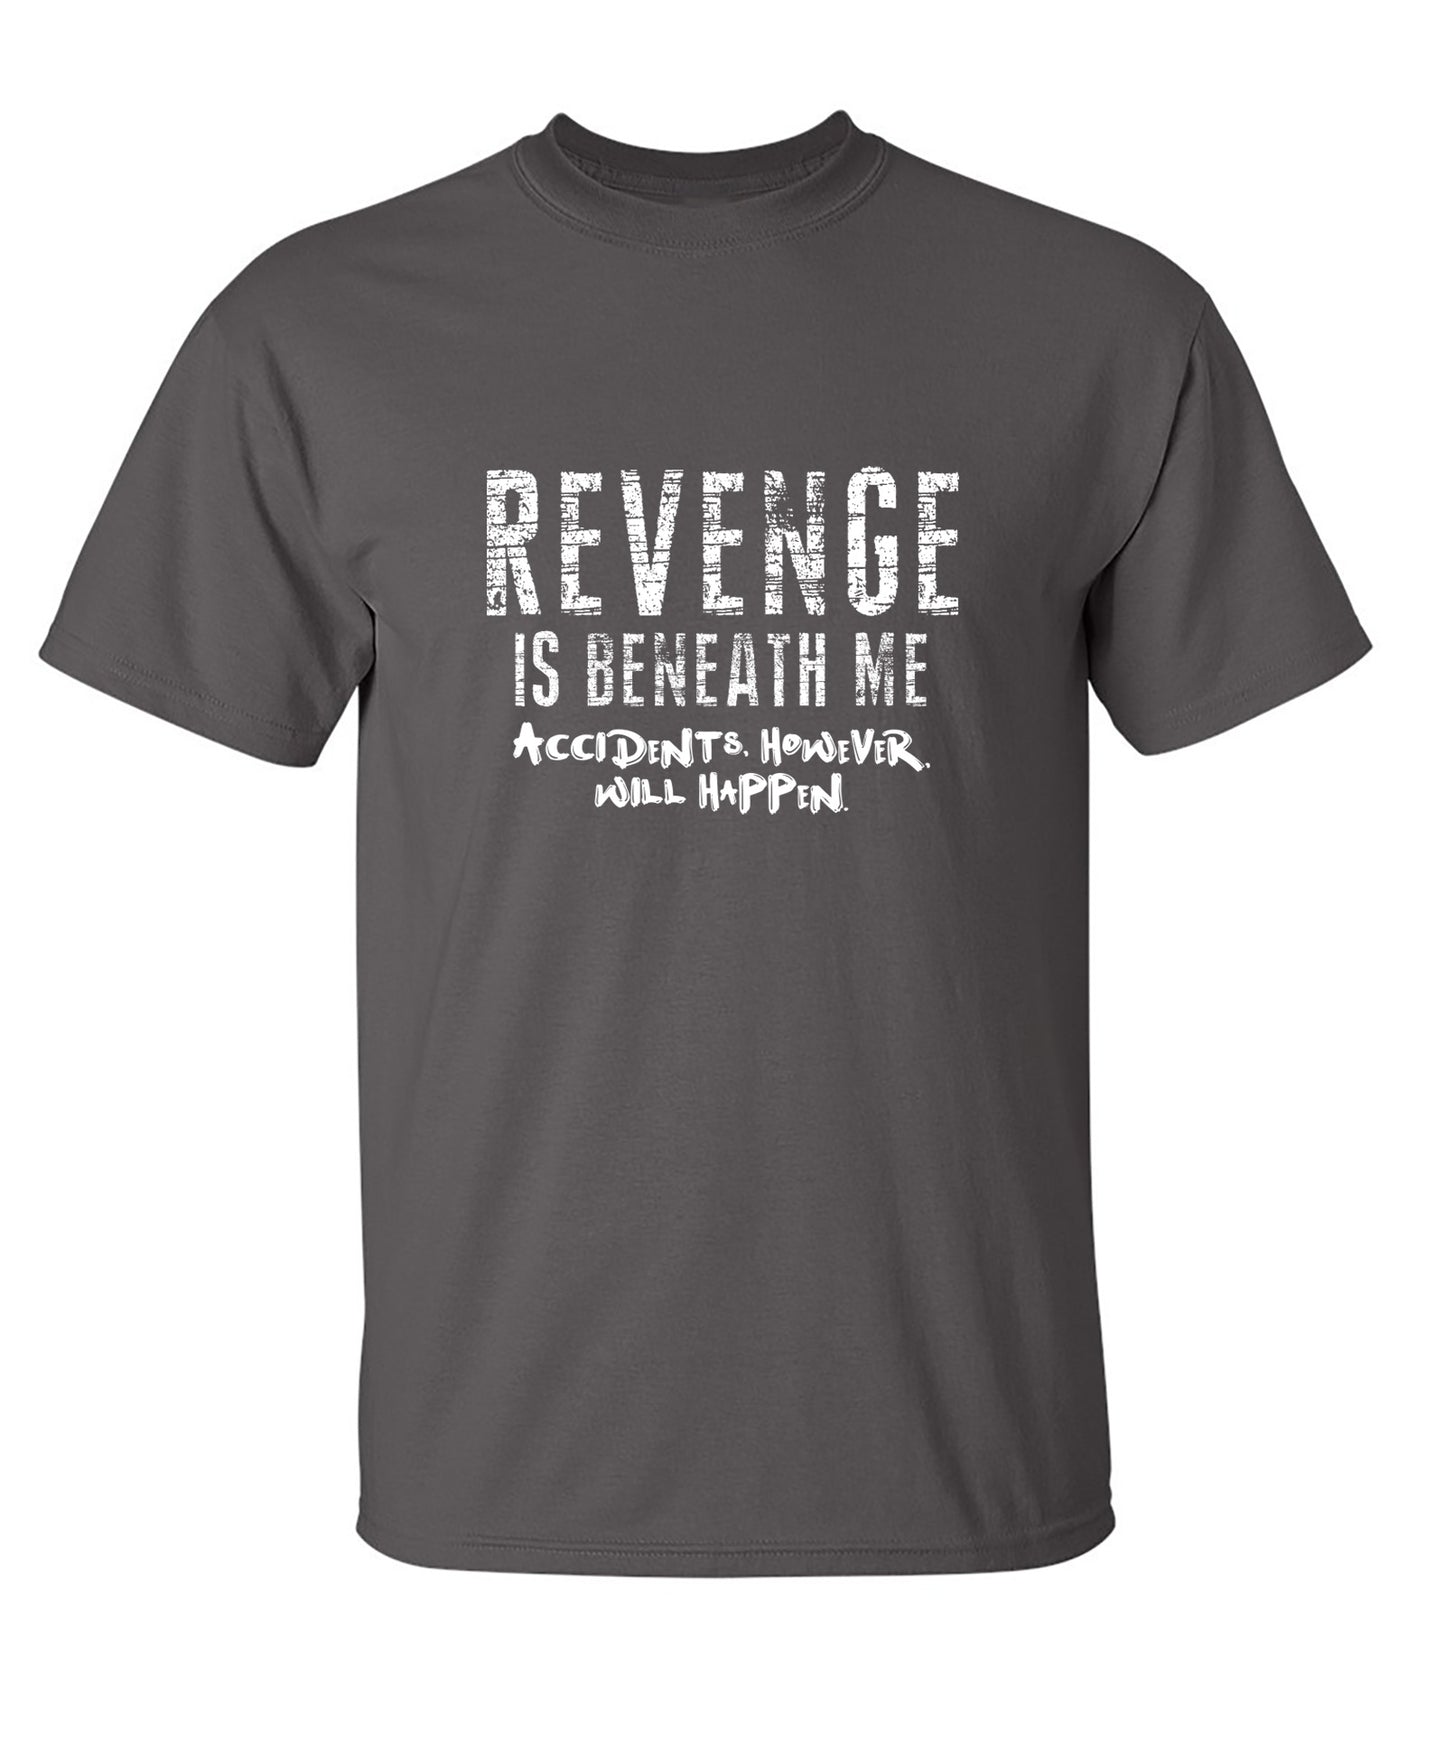 Revenge Is Beneath Me - Funny T Shirts & Graphic Tees